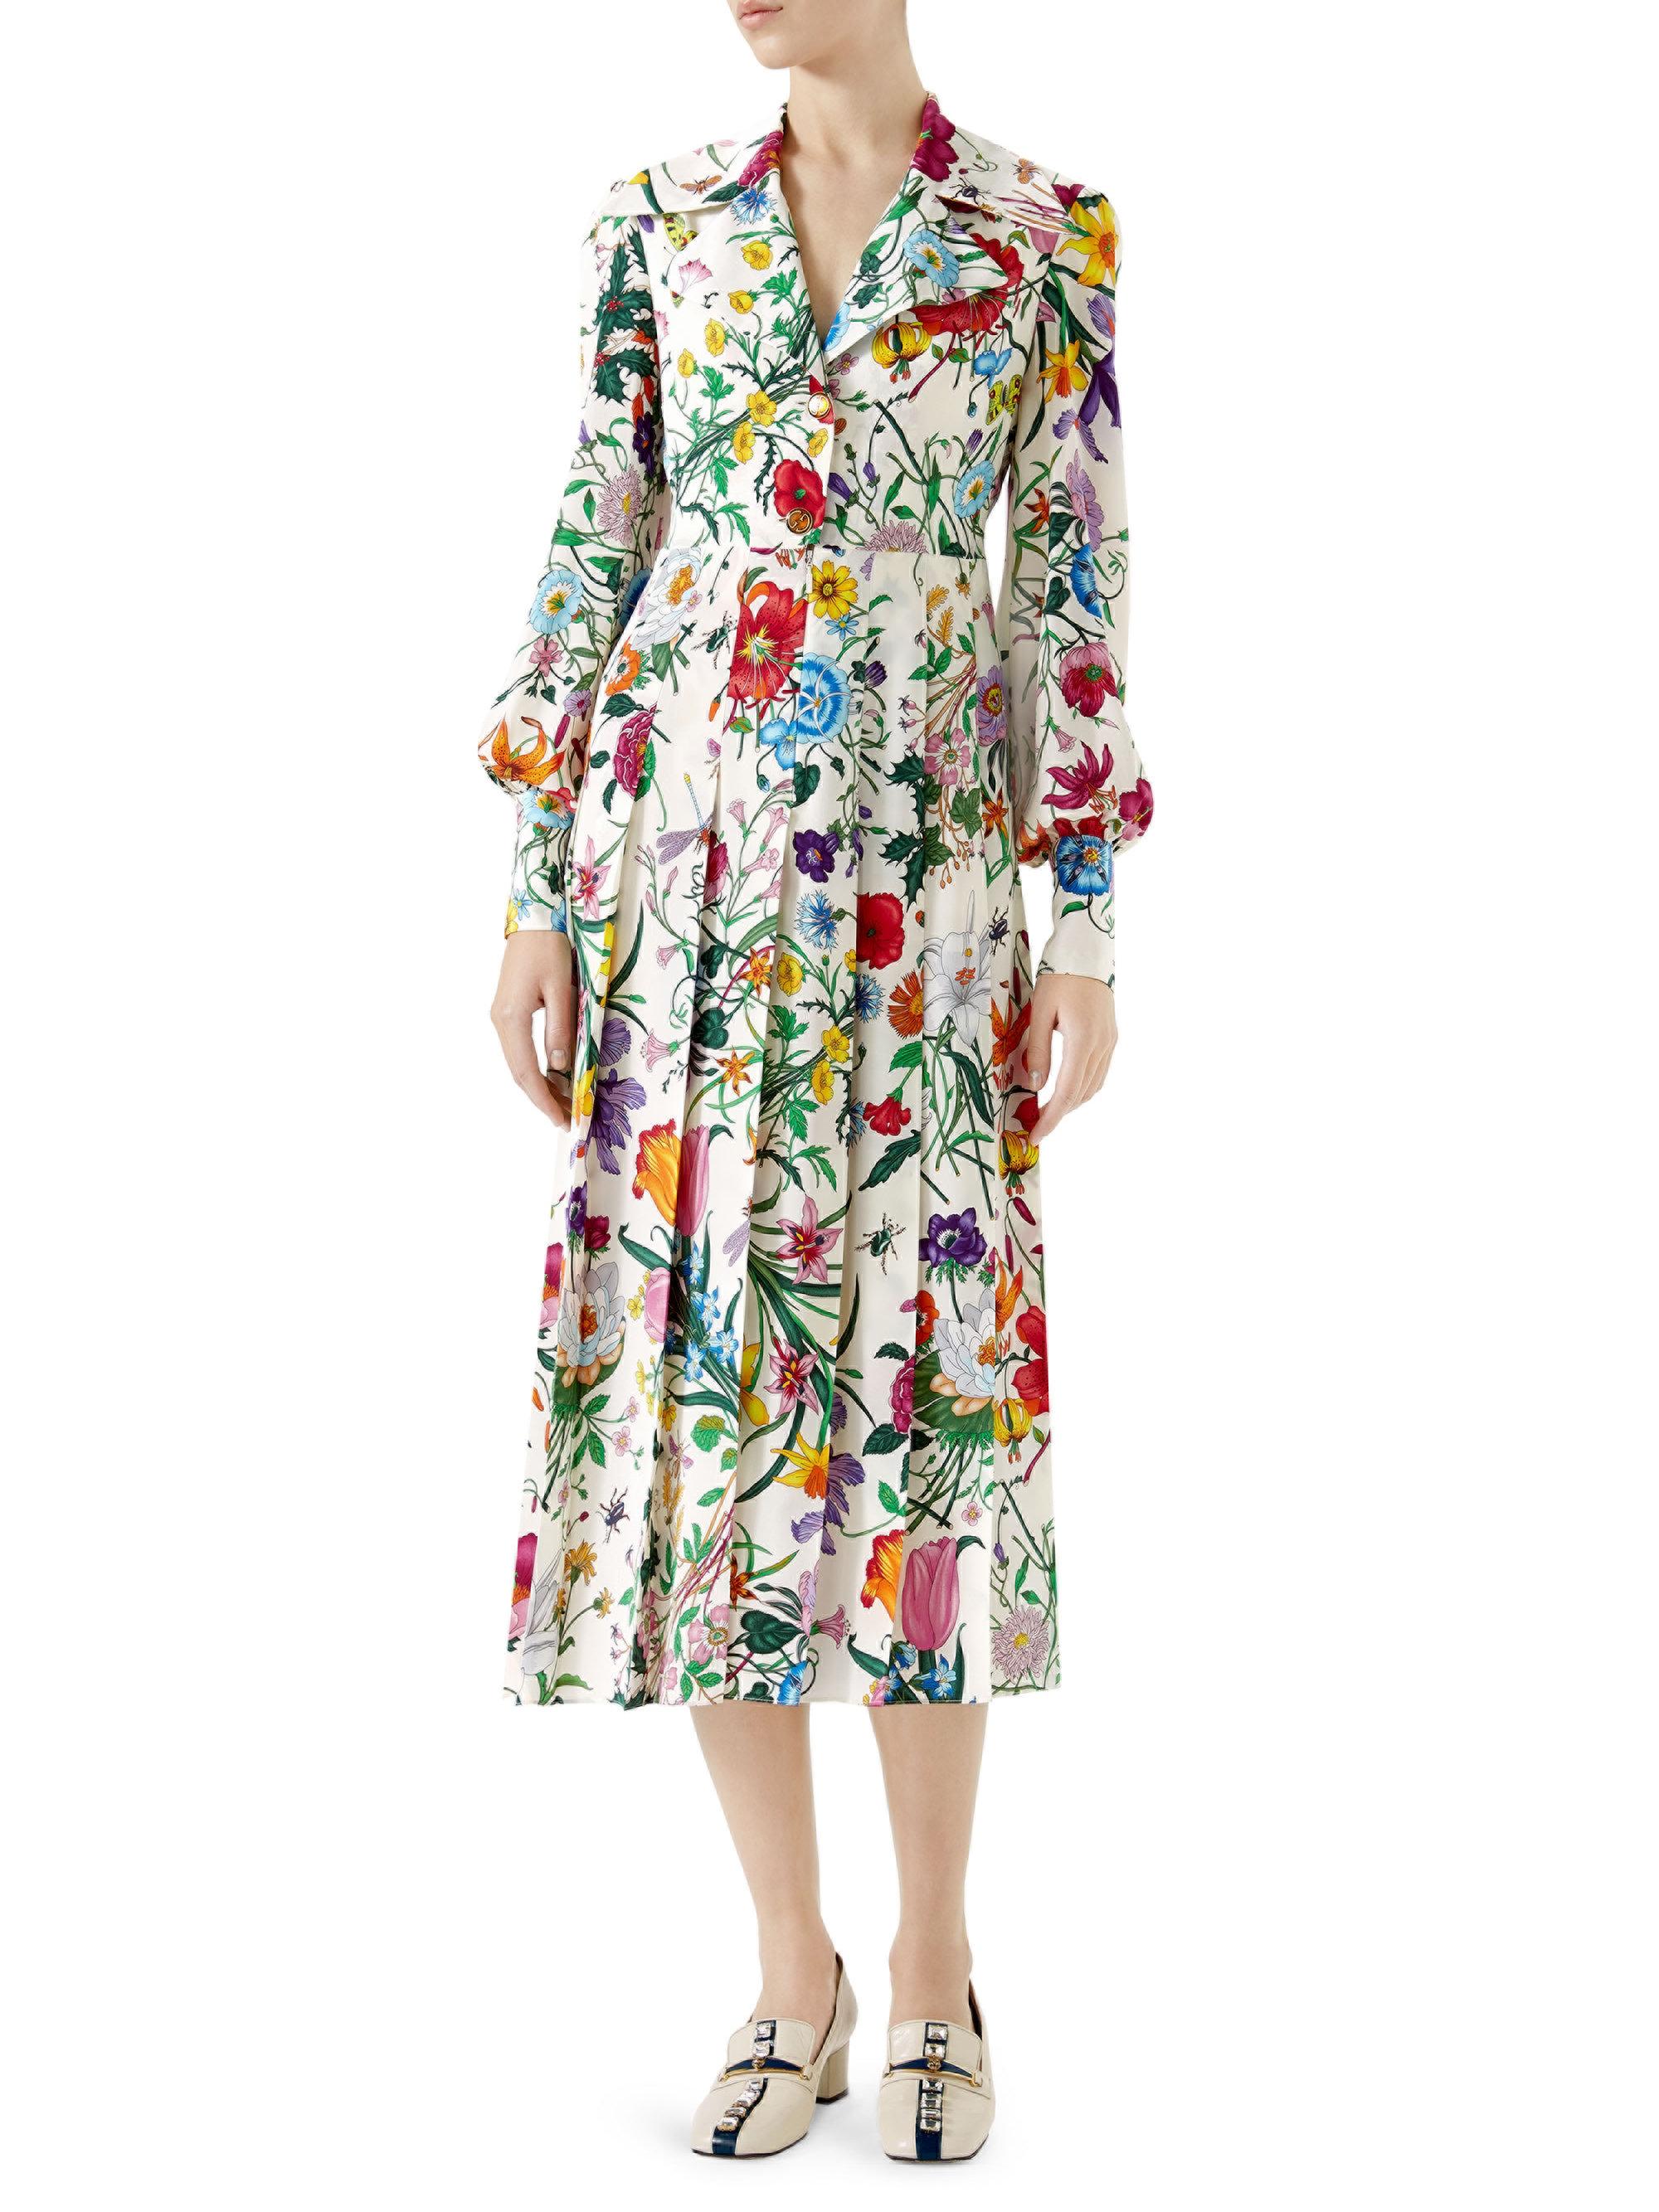 Gucci Floral Print Silk Shirt Dress in Ivory (White) - Lyst